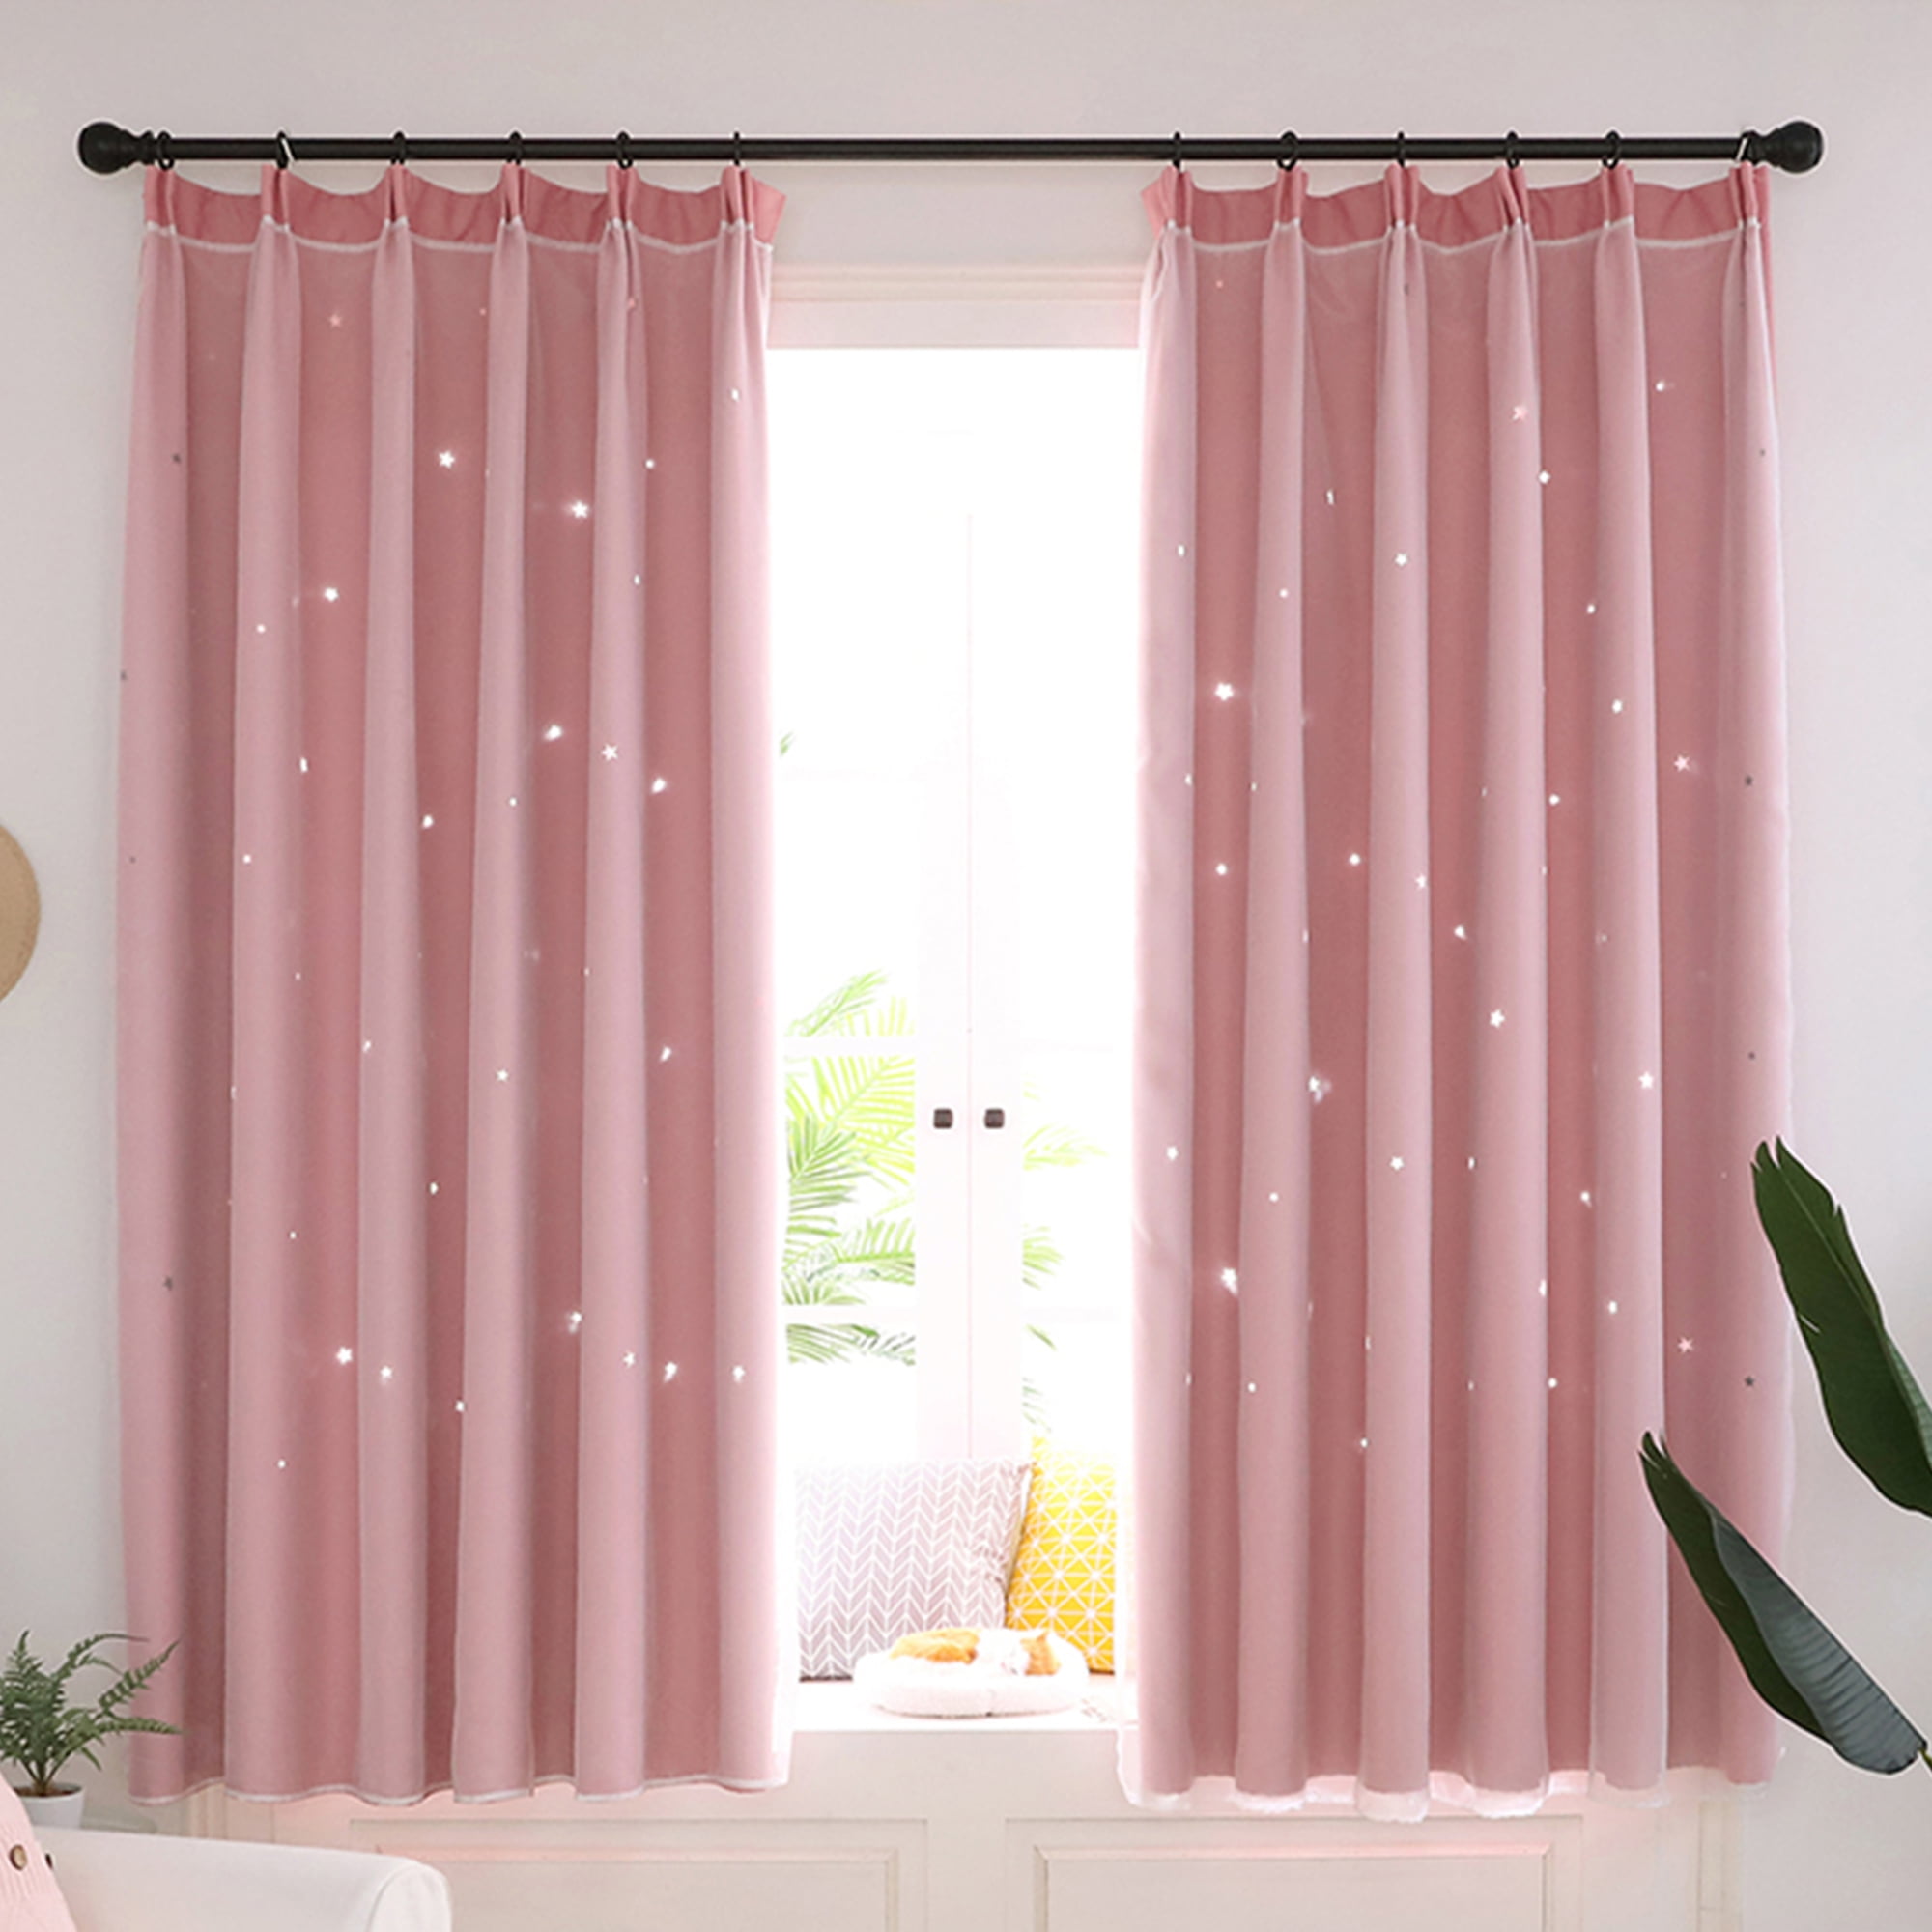 Double Layer Blackout + Sheer Curtains Starry Hollow-Out Stars Curtain